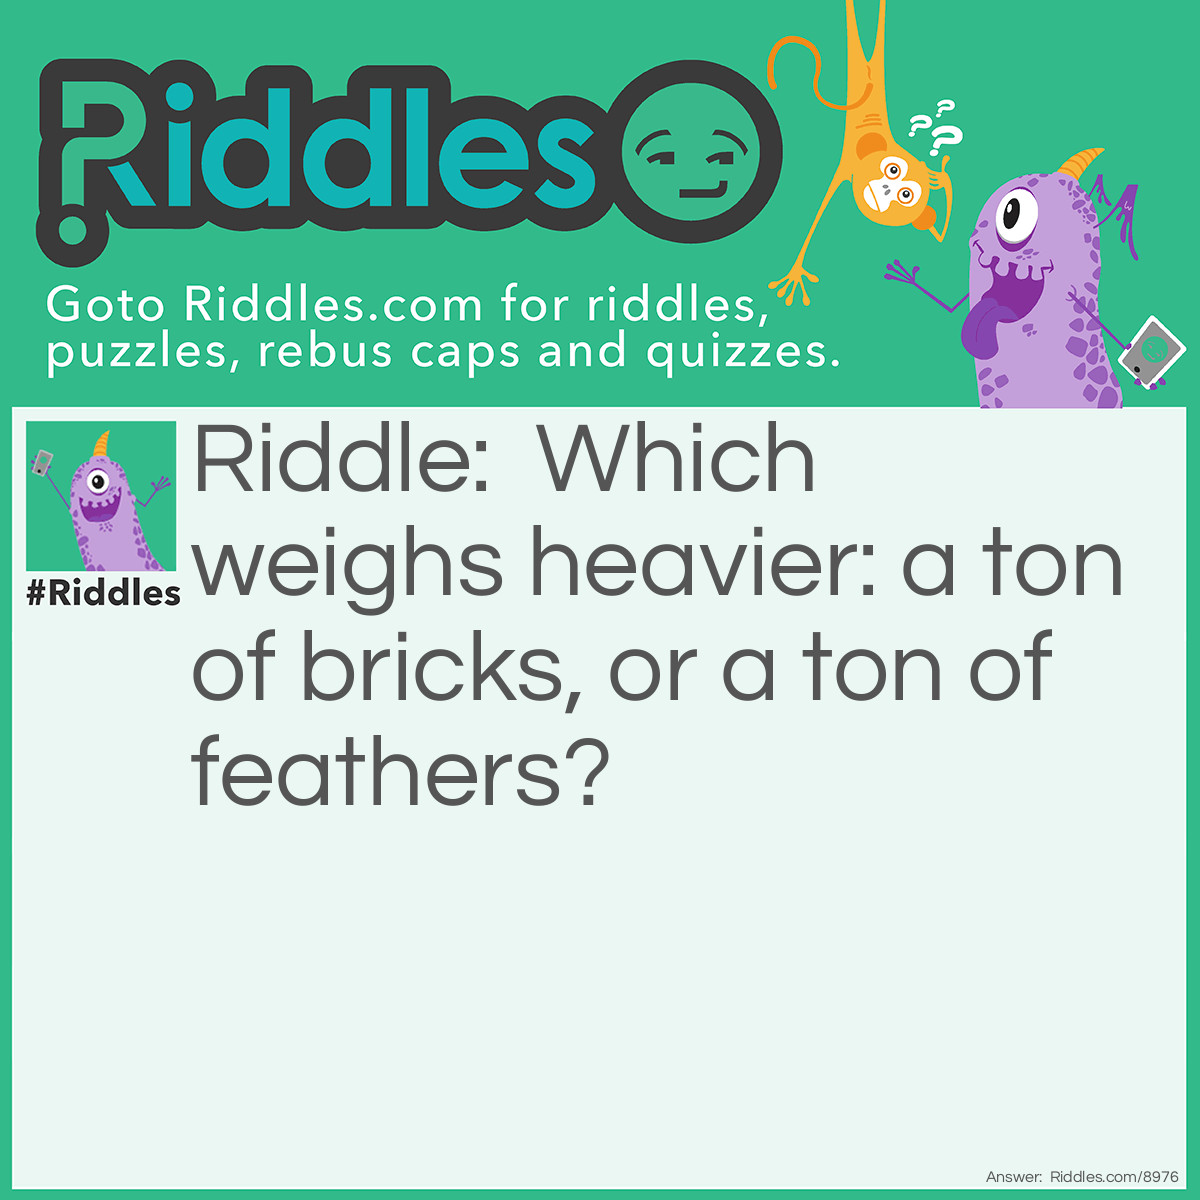 Riddle: Which weighs heavier: a ton of bricks, or a ton of feathers? Answer: Neither, they both weigh a ton.